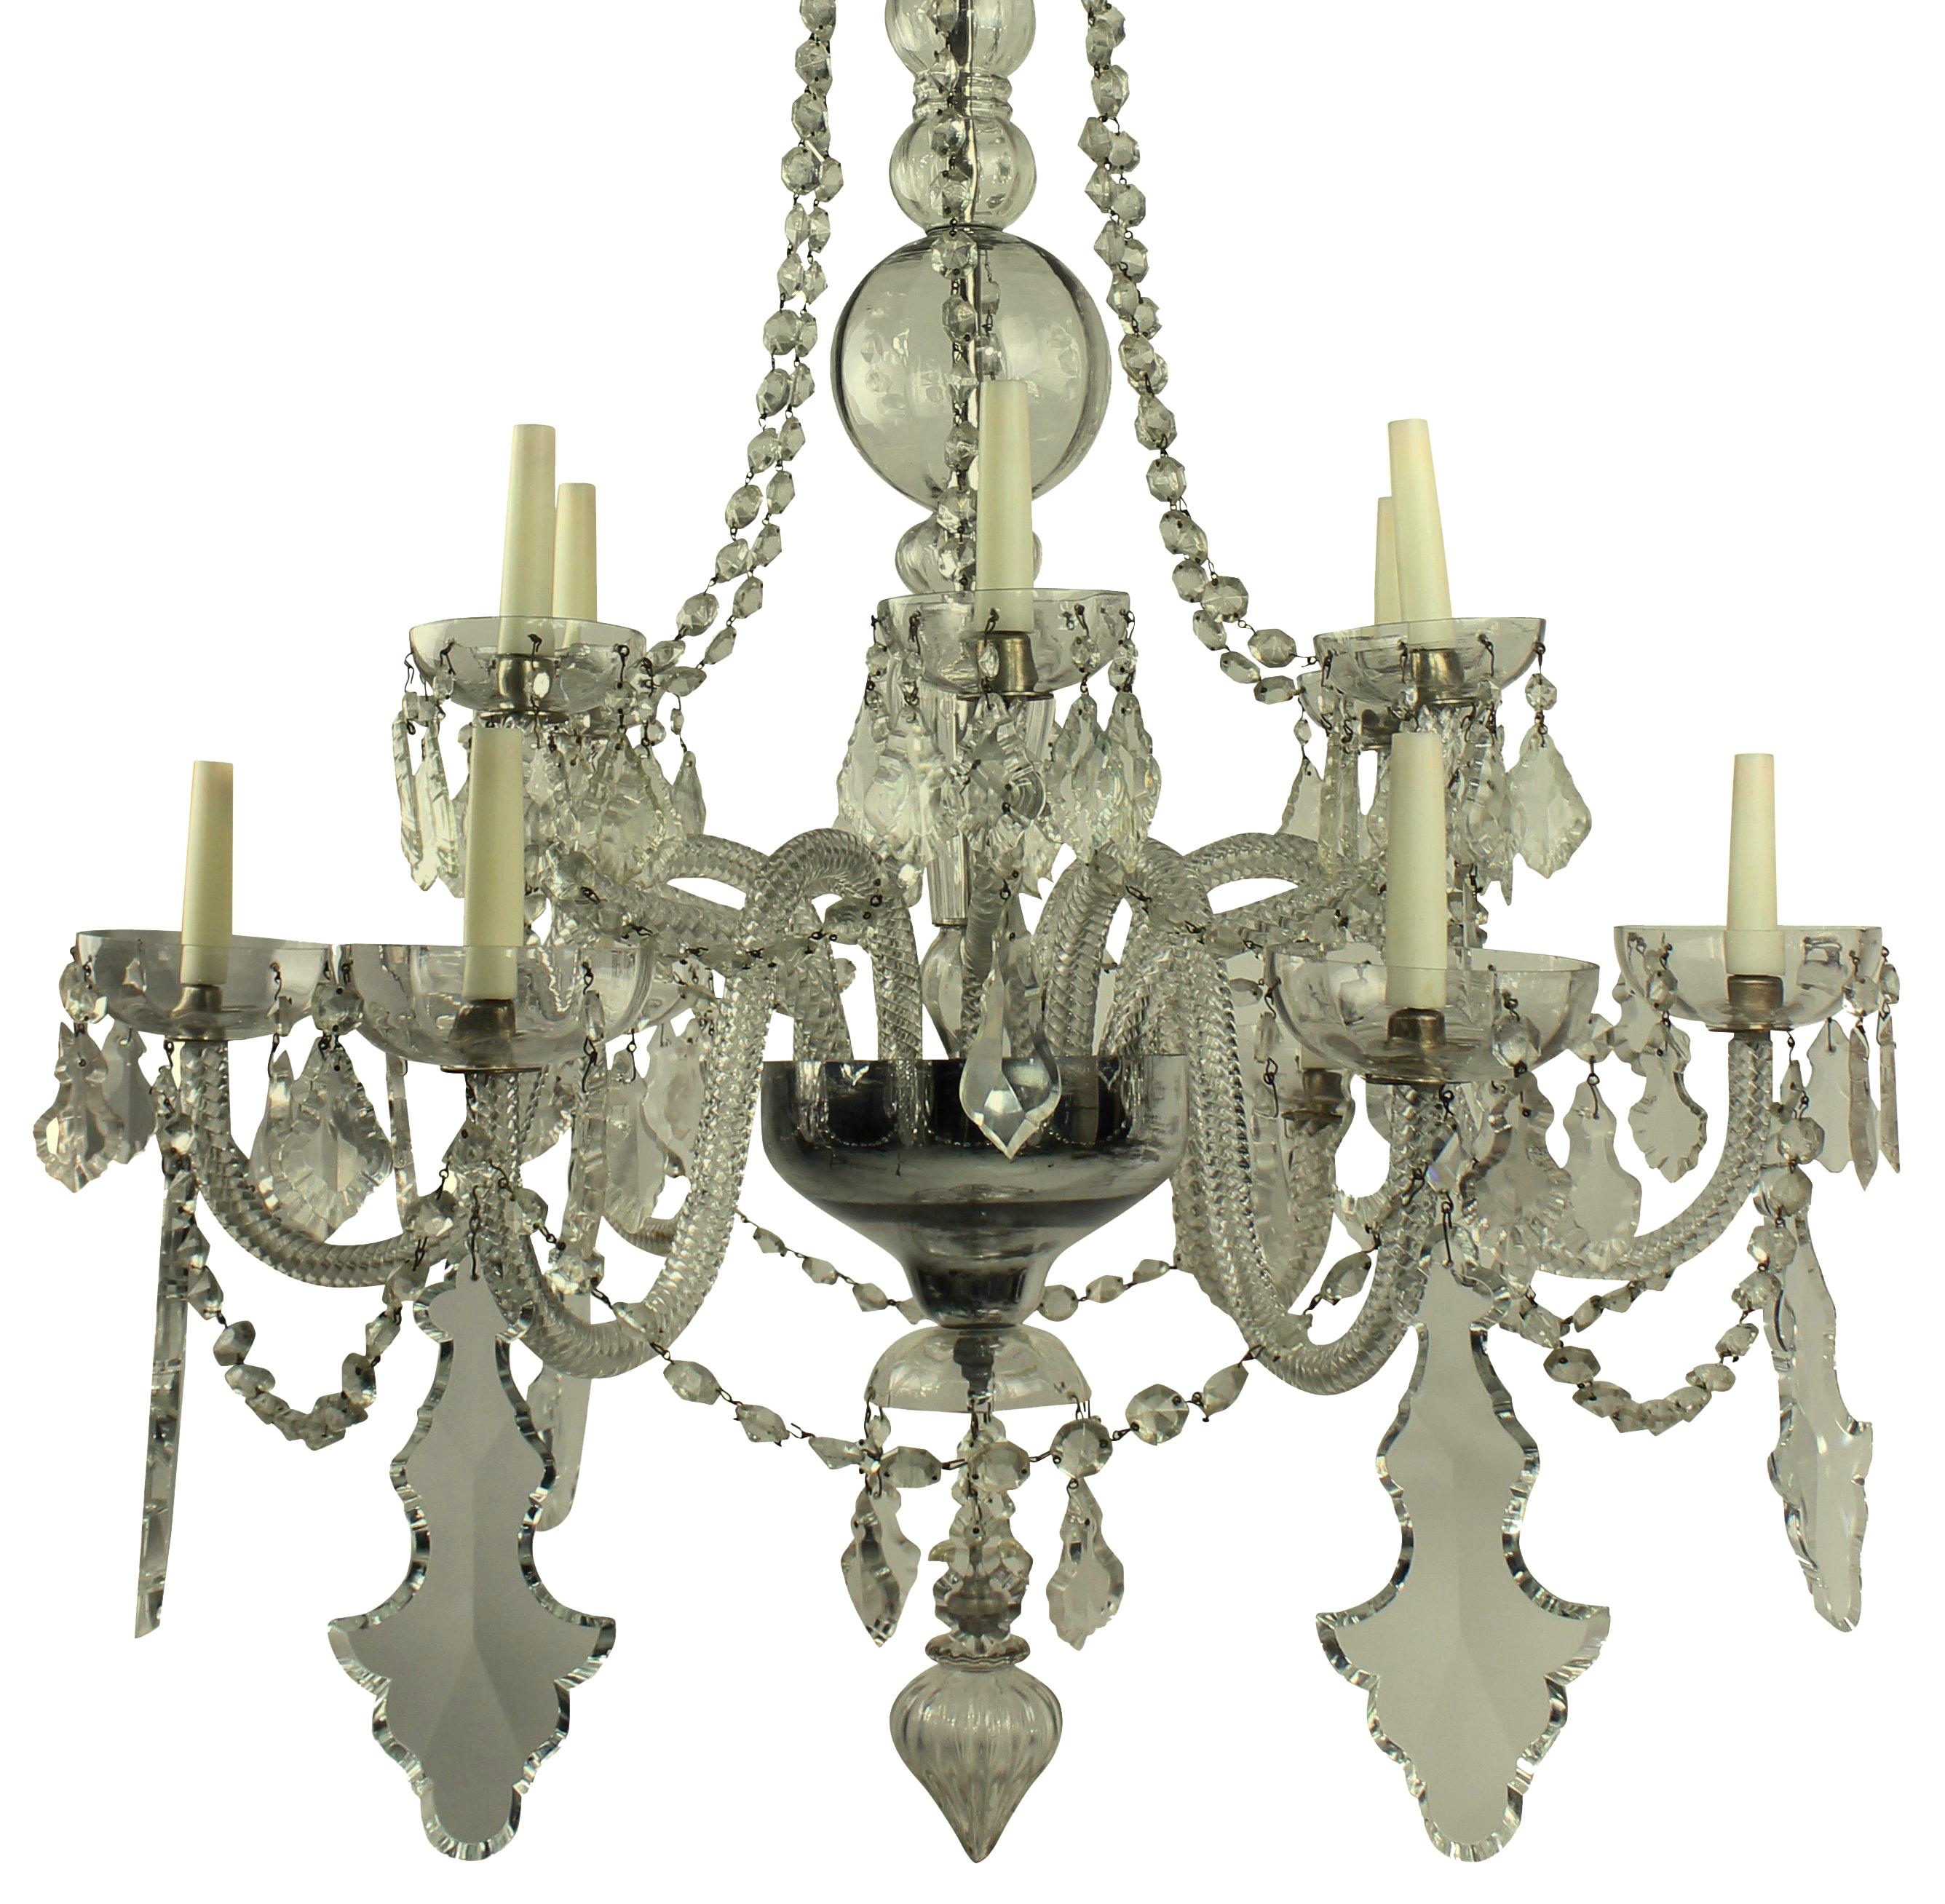 A fine French cut-glass chandelier of good proportions, hung throughout with plaques and swags.